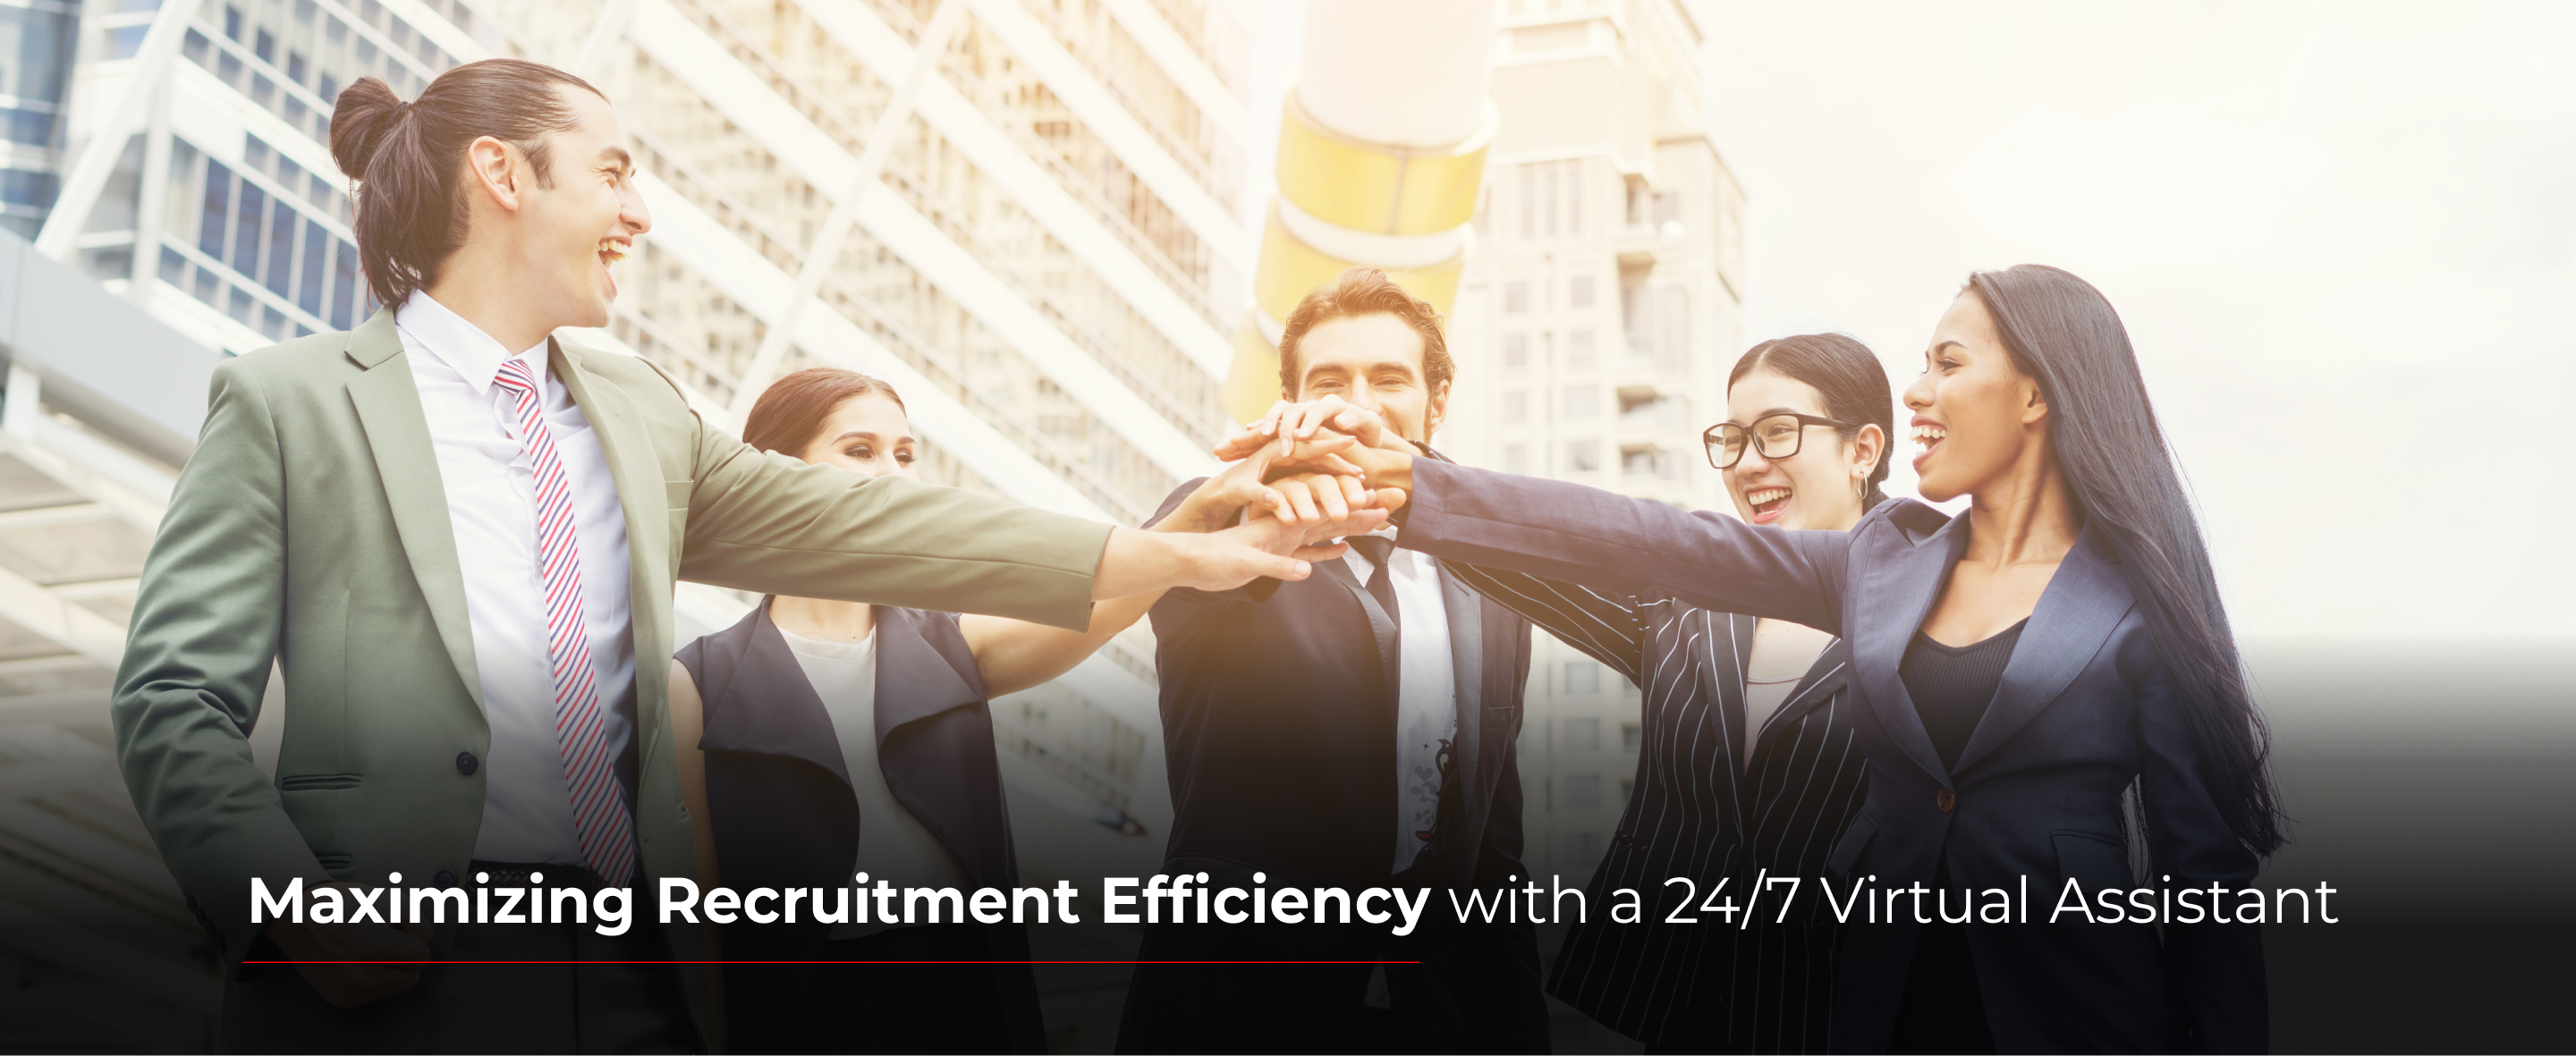 Maximizing Recruitment Efficiency with a 24/7 Virtual Assistant